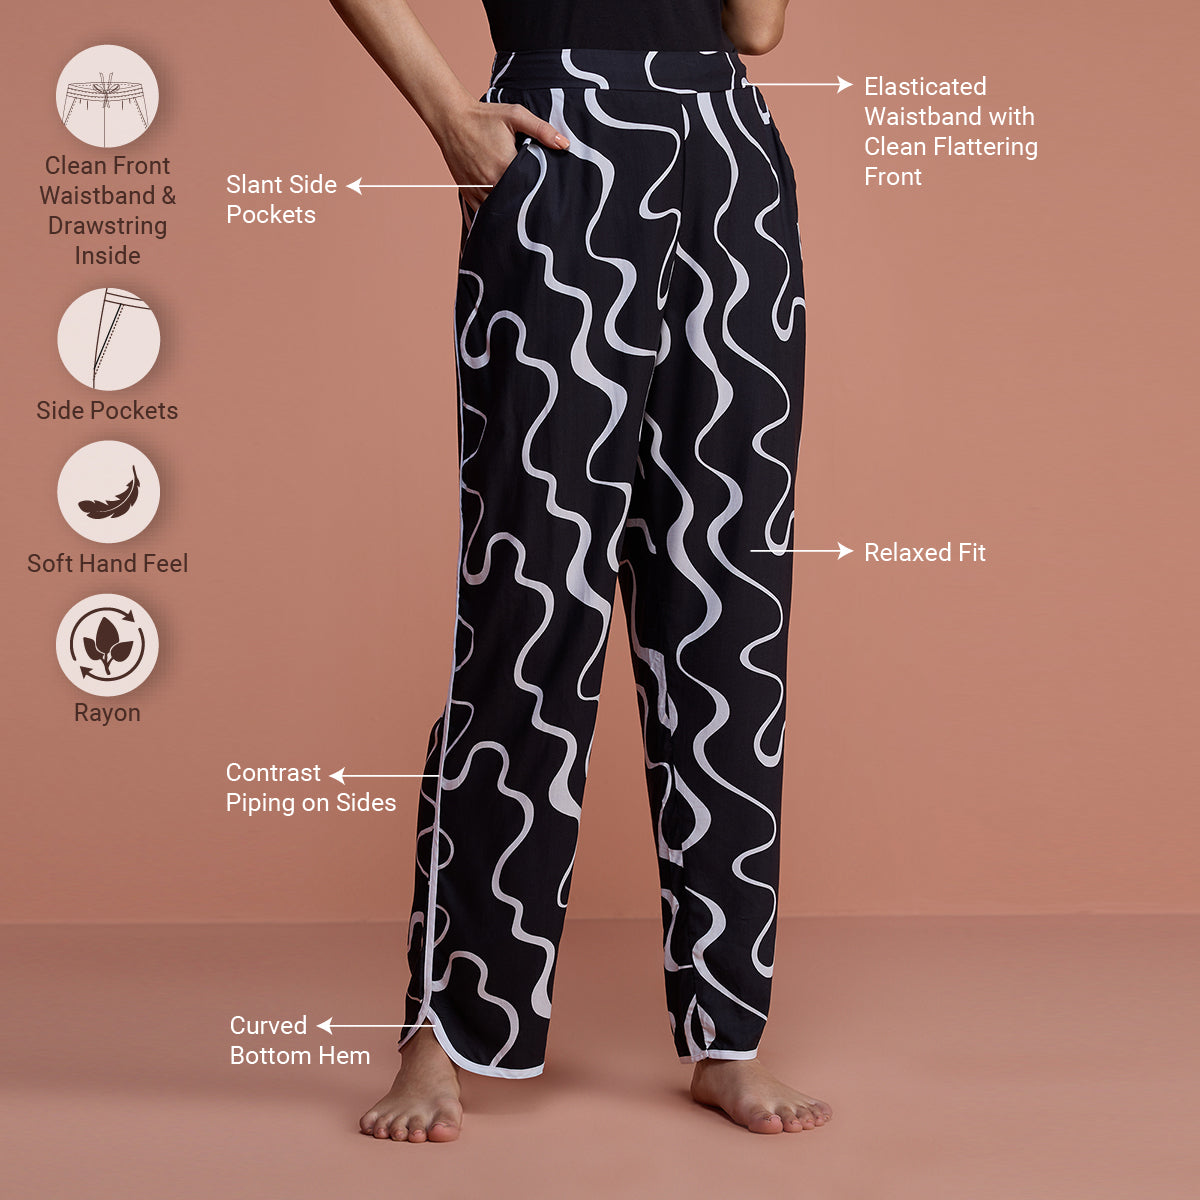 Sleep In Step Out Pajama  - NYS130 - Swiggly Black